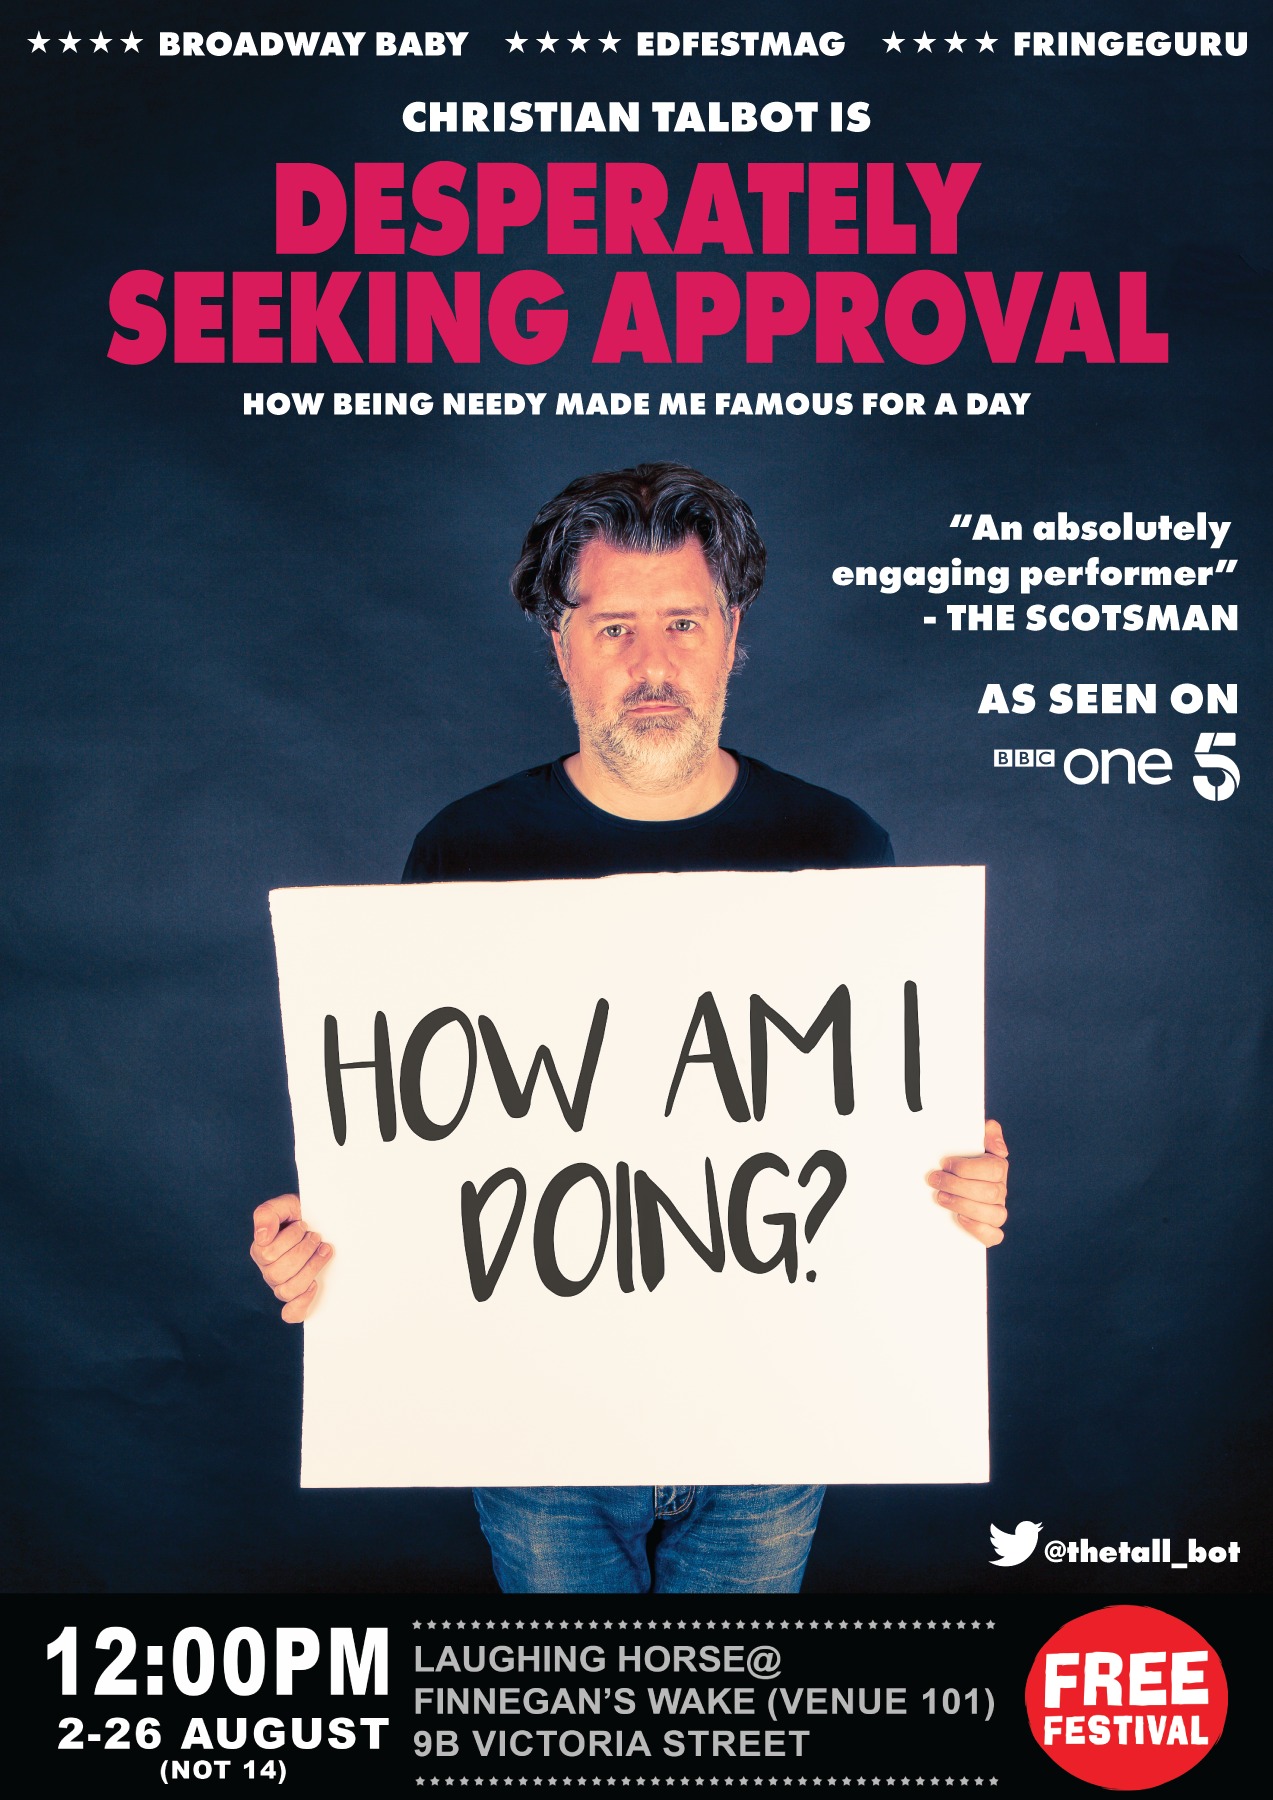 The poster for Christian Talbot: Desperately Seeking Approval